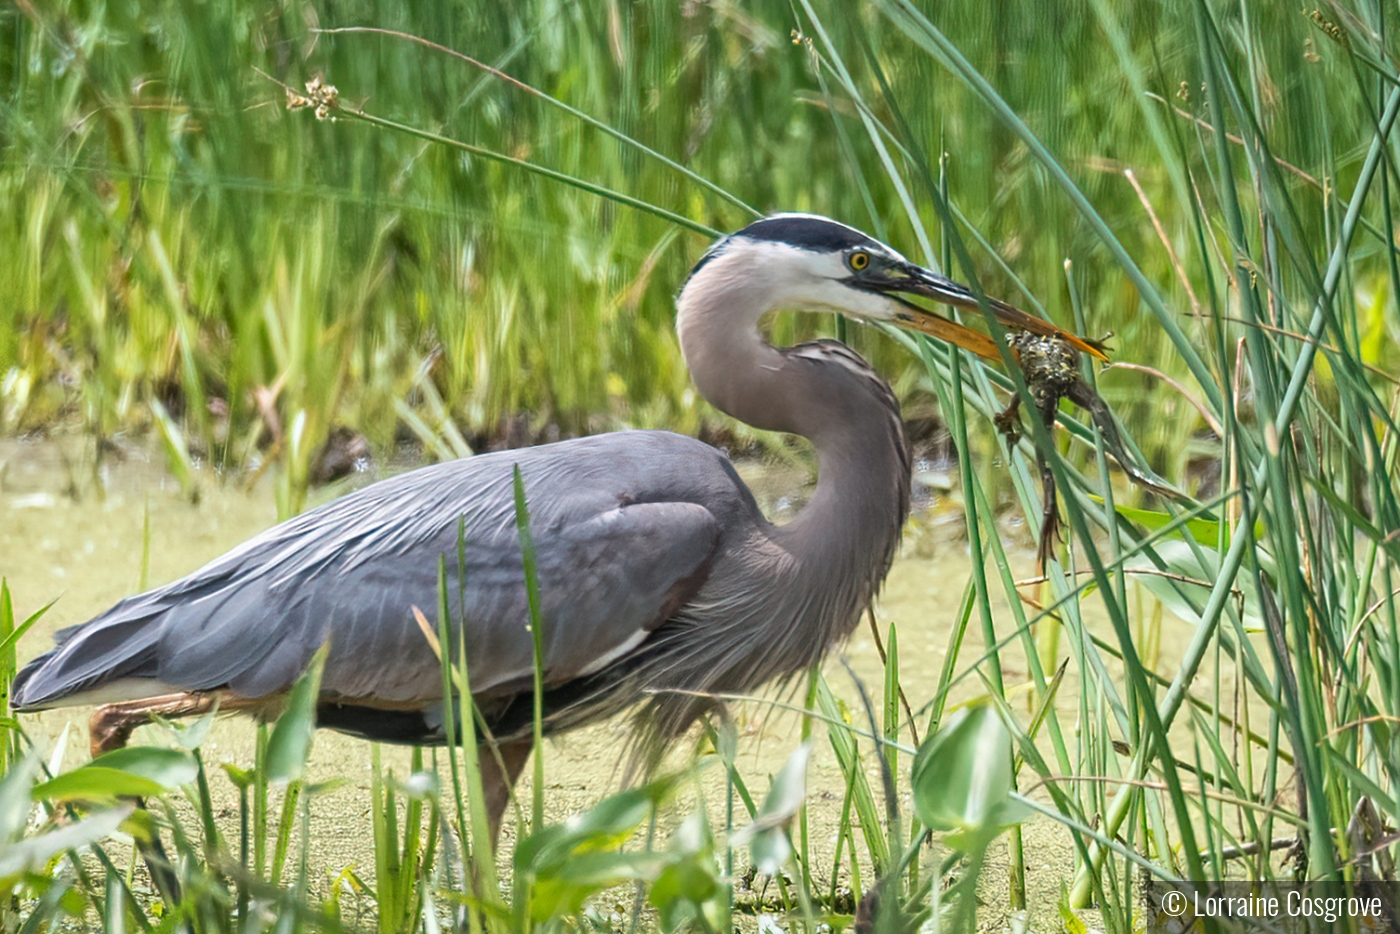 Blue Heron With Frog by Lorraine Cosgrove